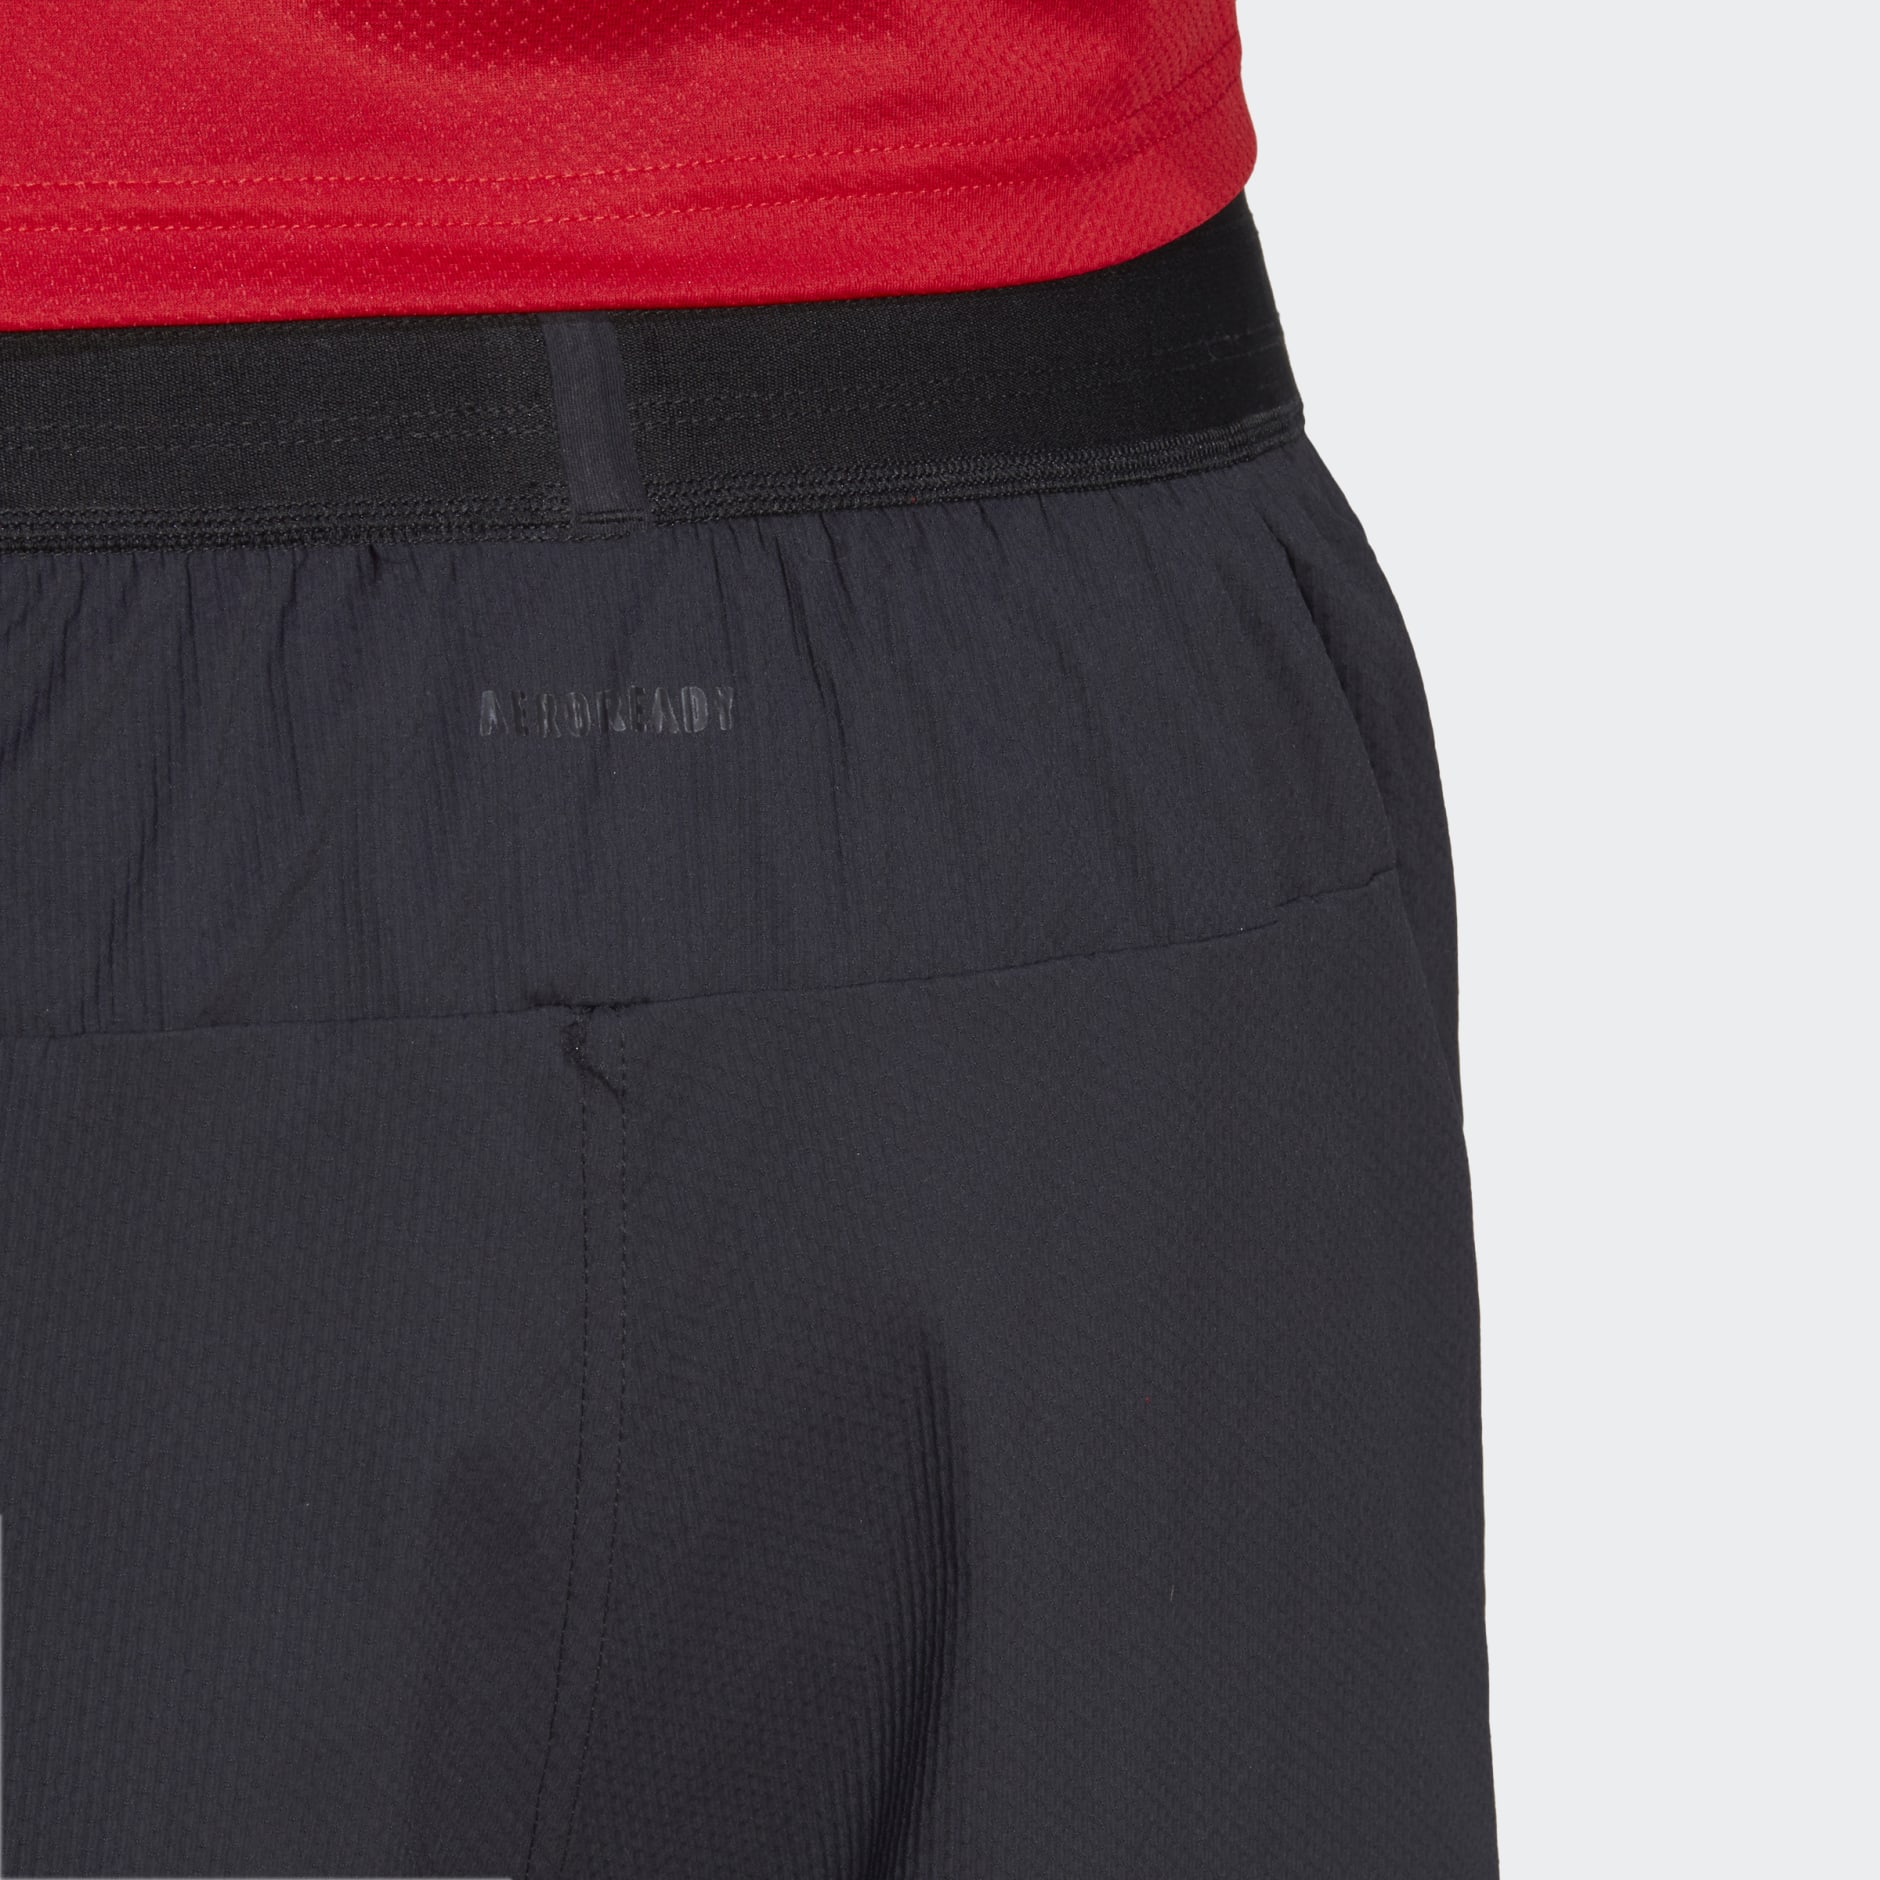 Clothing - Power Workout Two-in-One Shorts - Black | adidas South Africa